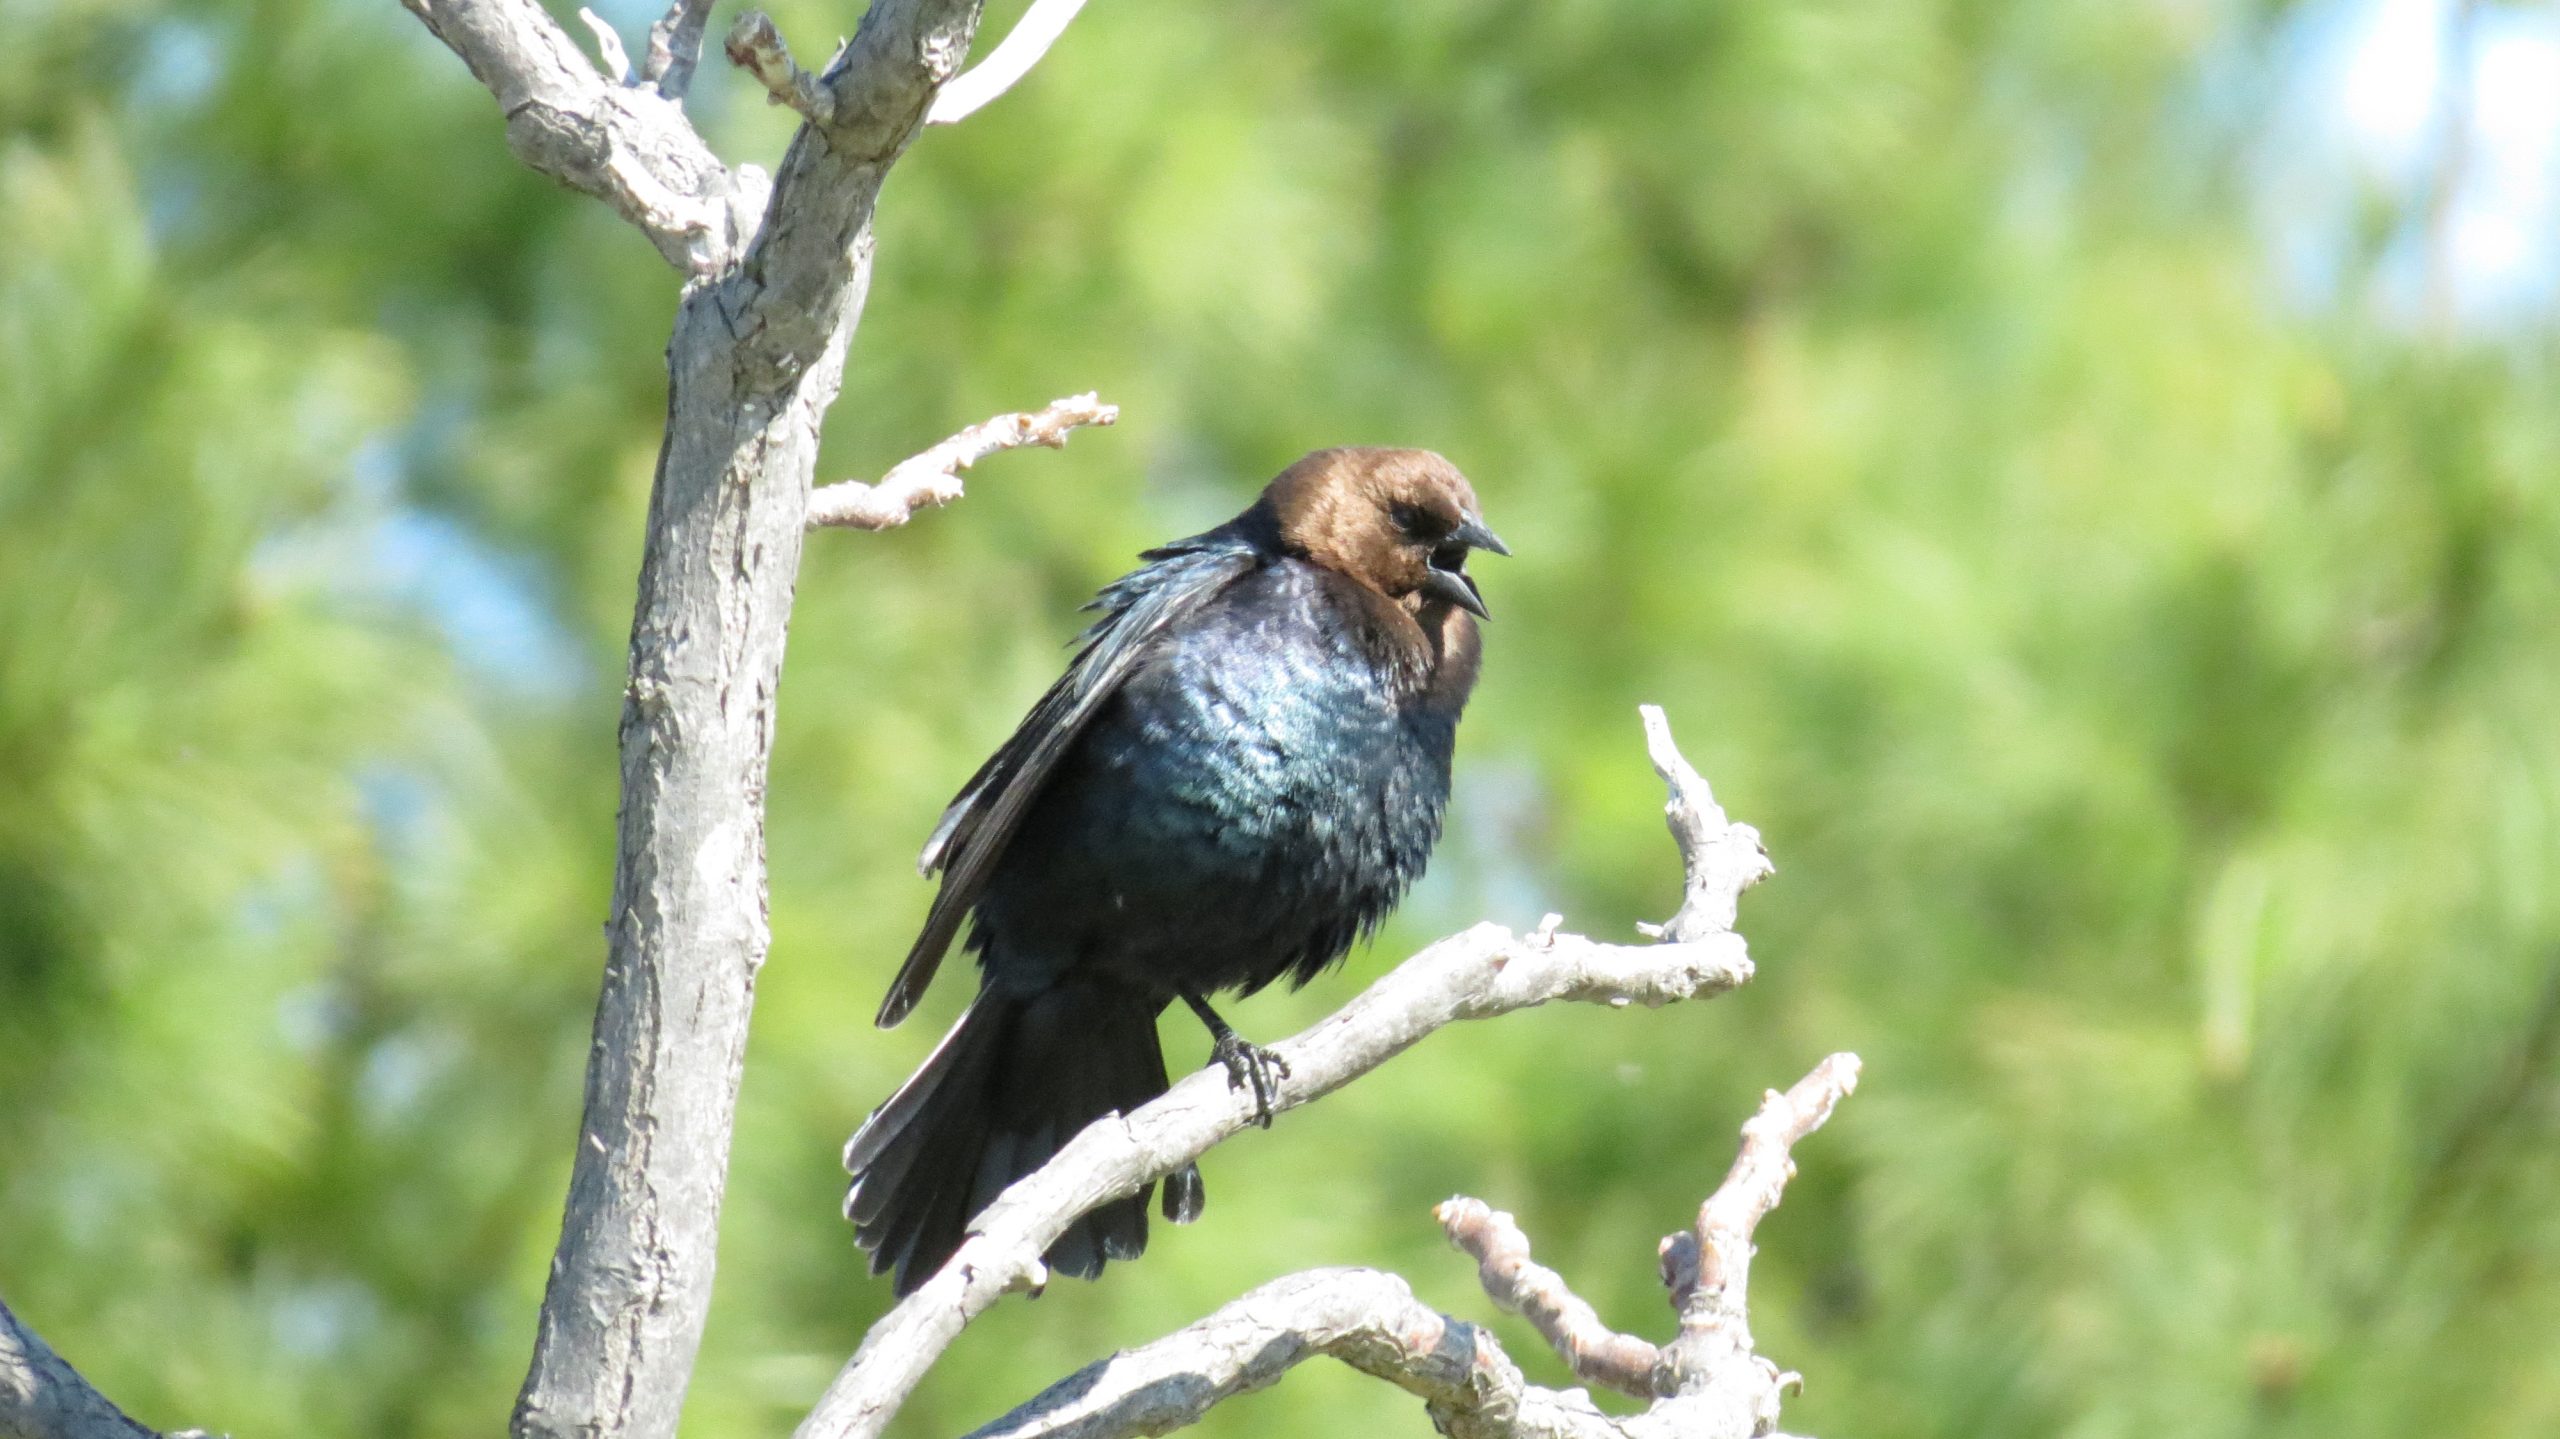 A male cowbird with glossy black plumage and a chocolate brown head perched on a branch in Colonel Sam Smith Park